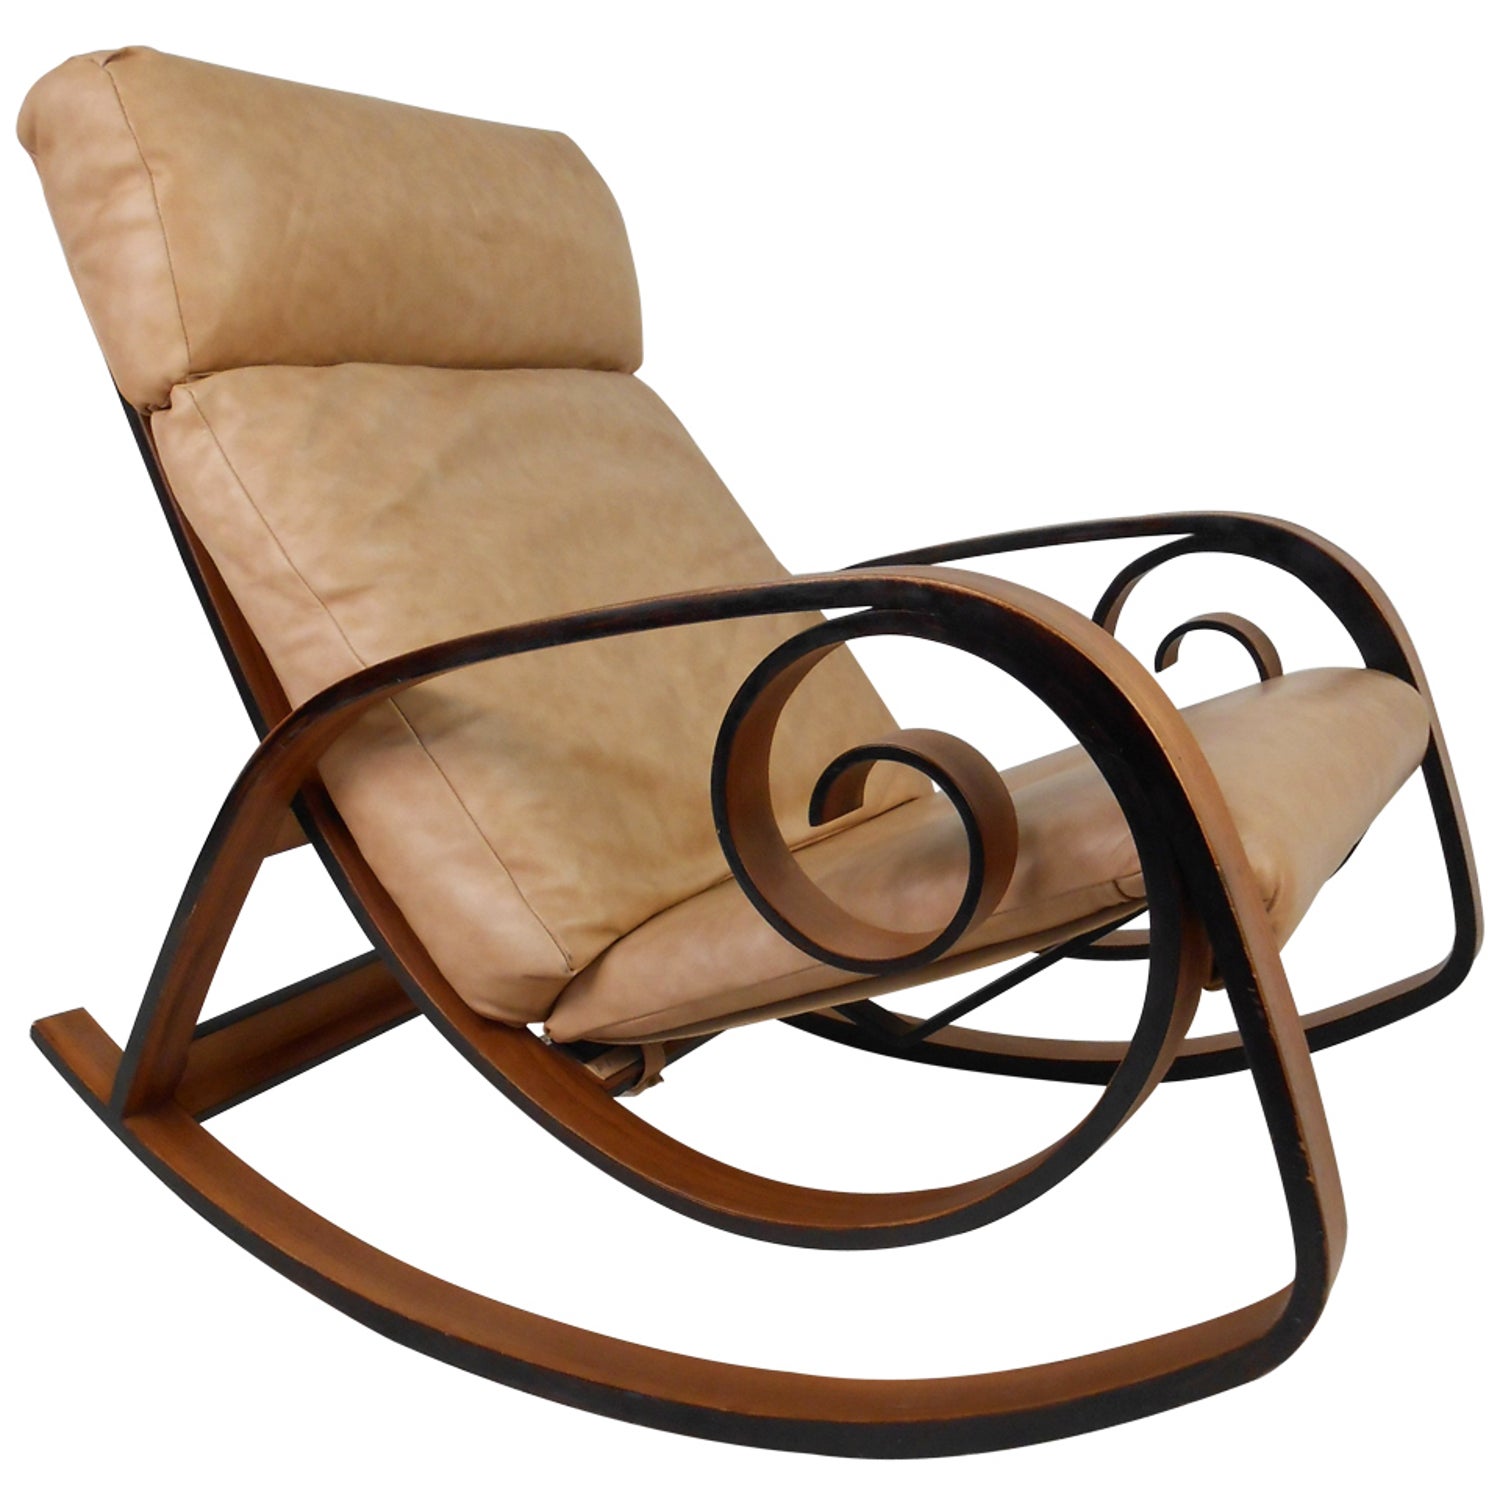 Rocking chair, Suisse, 1979 For Sale at 1stDibs